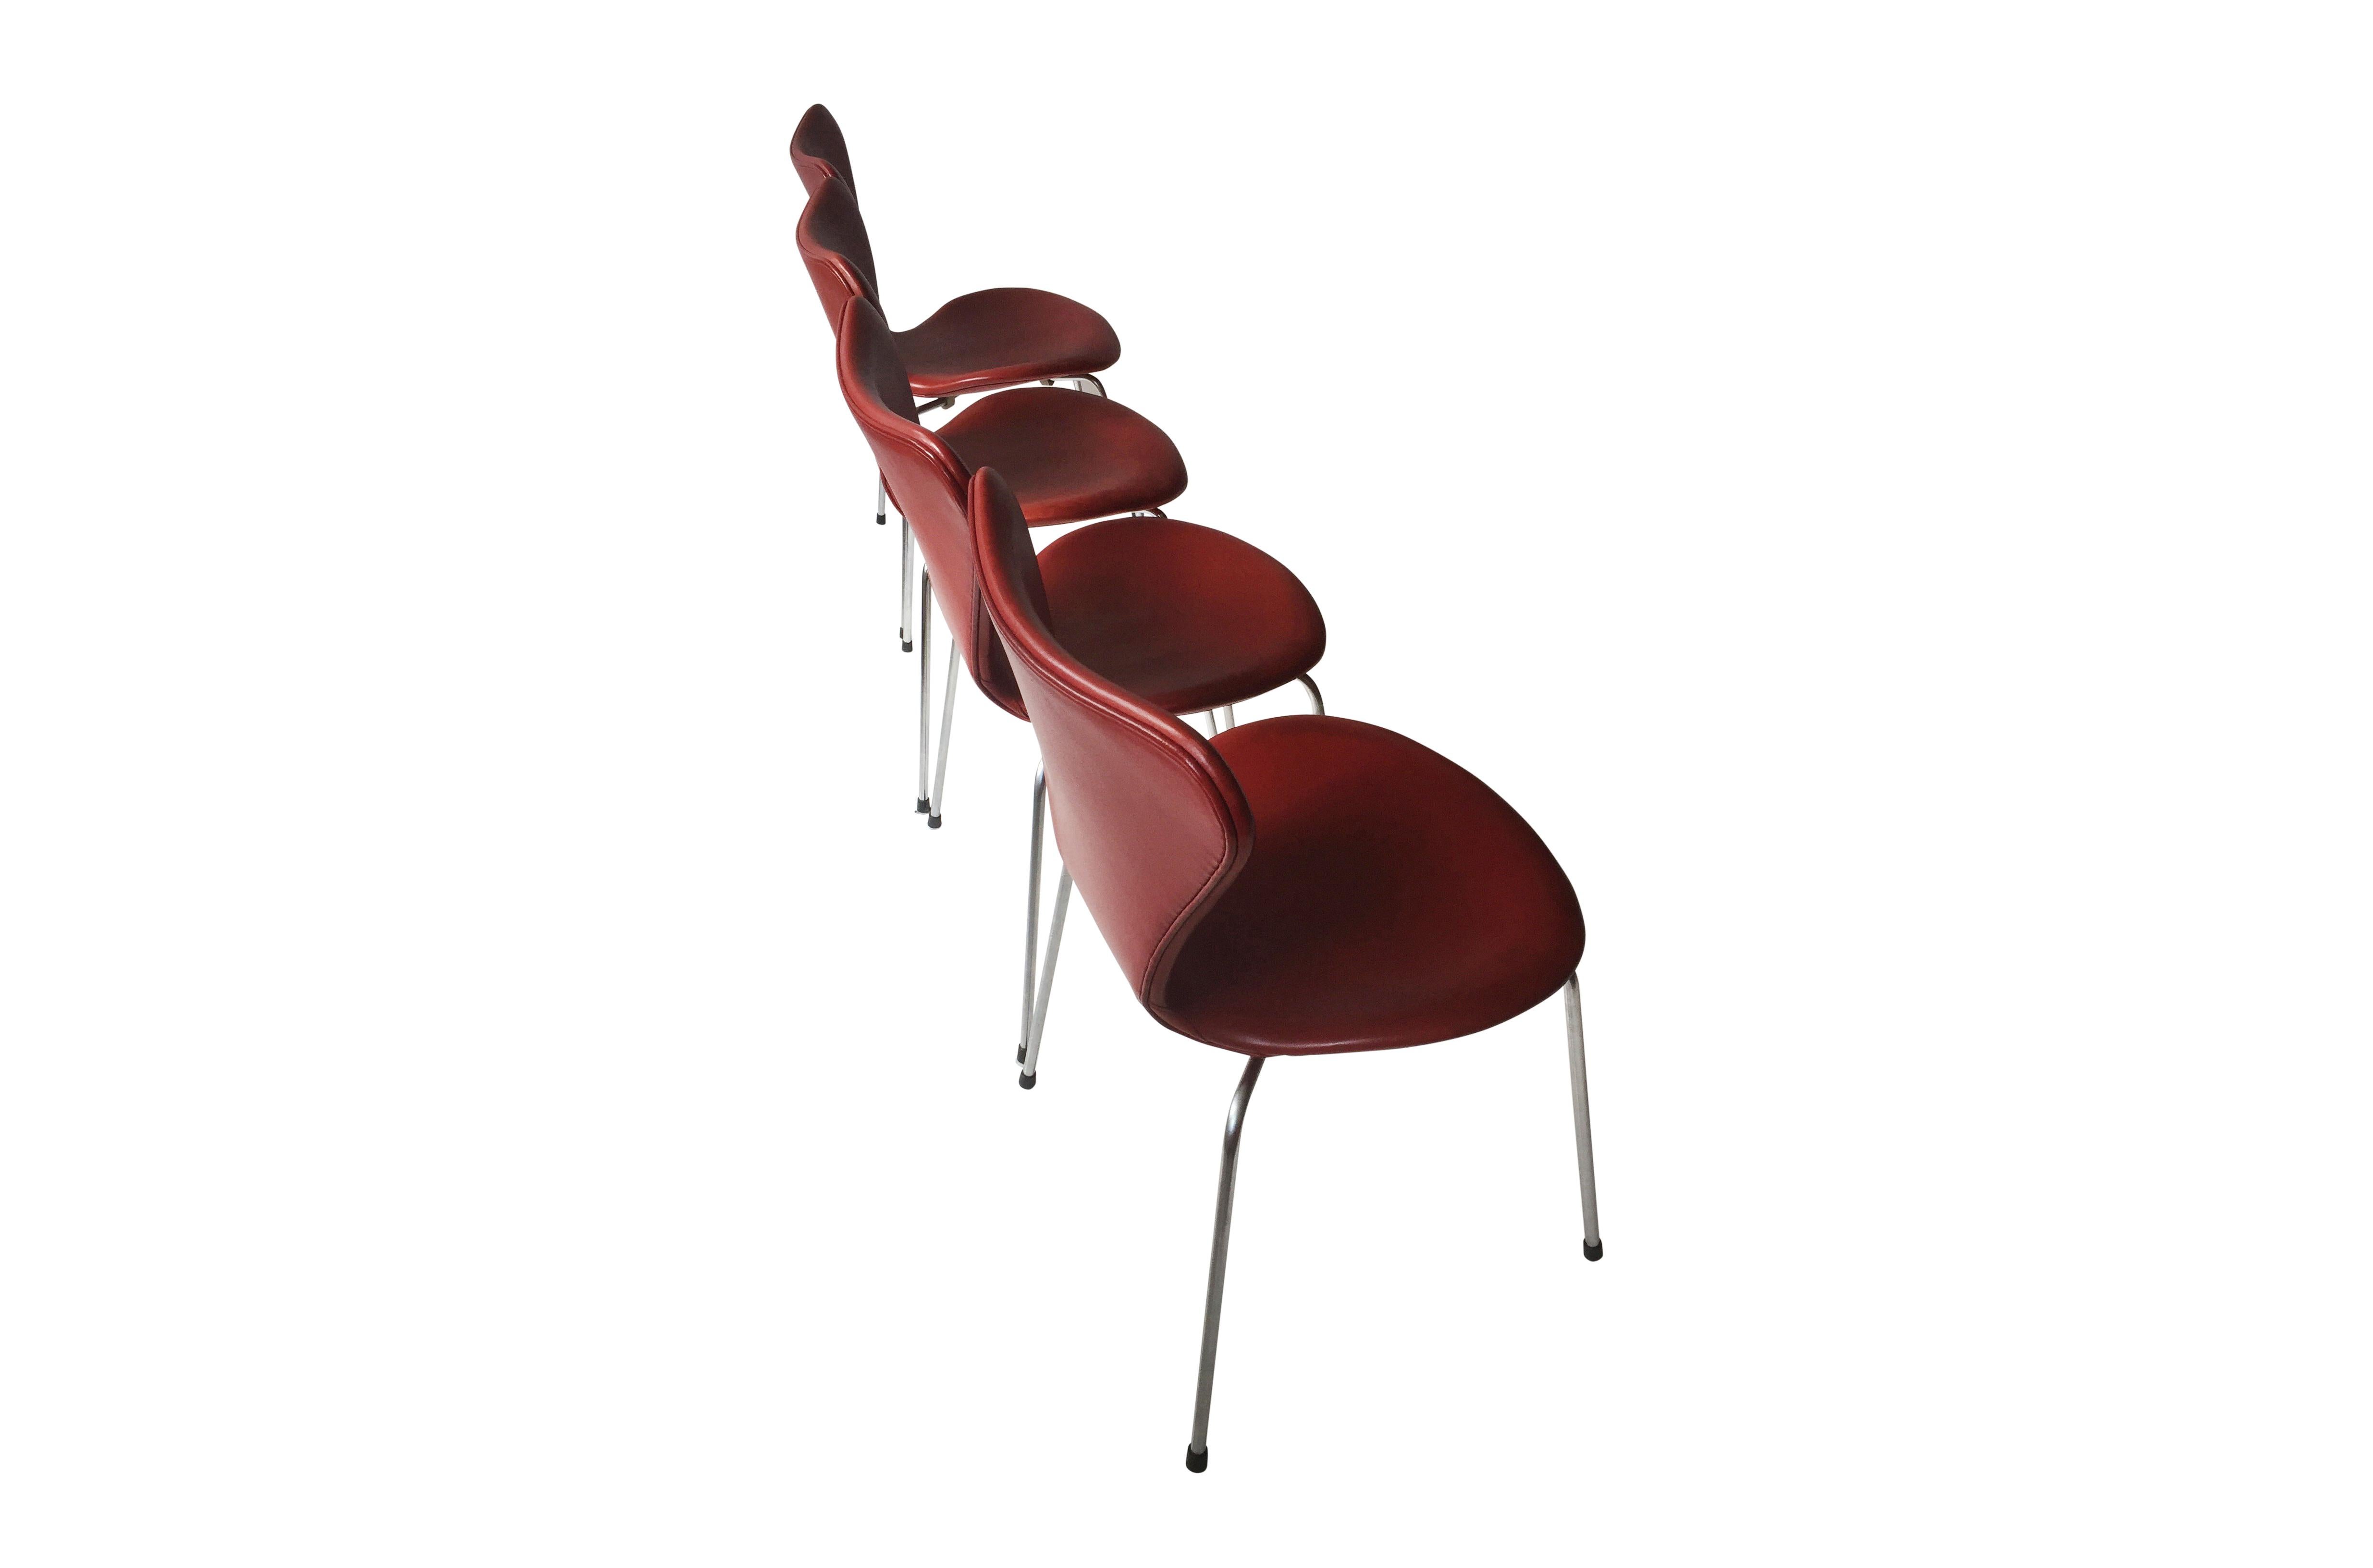 A set of 8 dining chairs, model 3107, designed by Arne Jacobsen in 1955, manufactured by Fritz Hansen. The chairs are in great condition, the Indian red leather is nice and warmly patinated. This Indian red leather is very rare to find. These